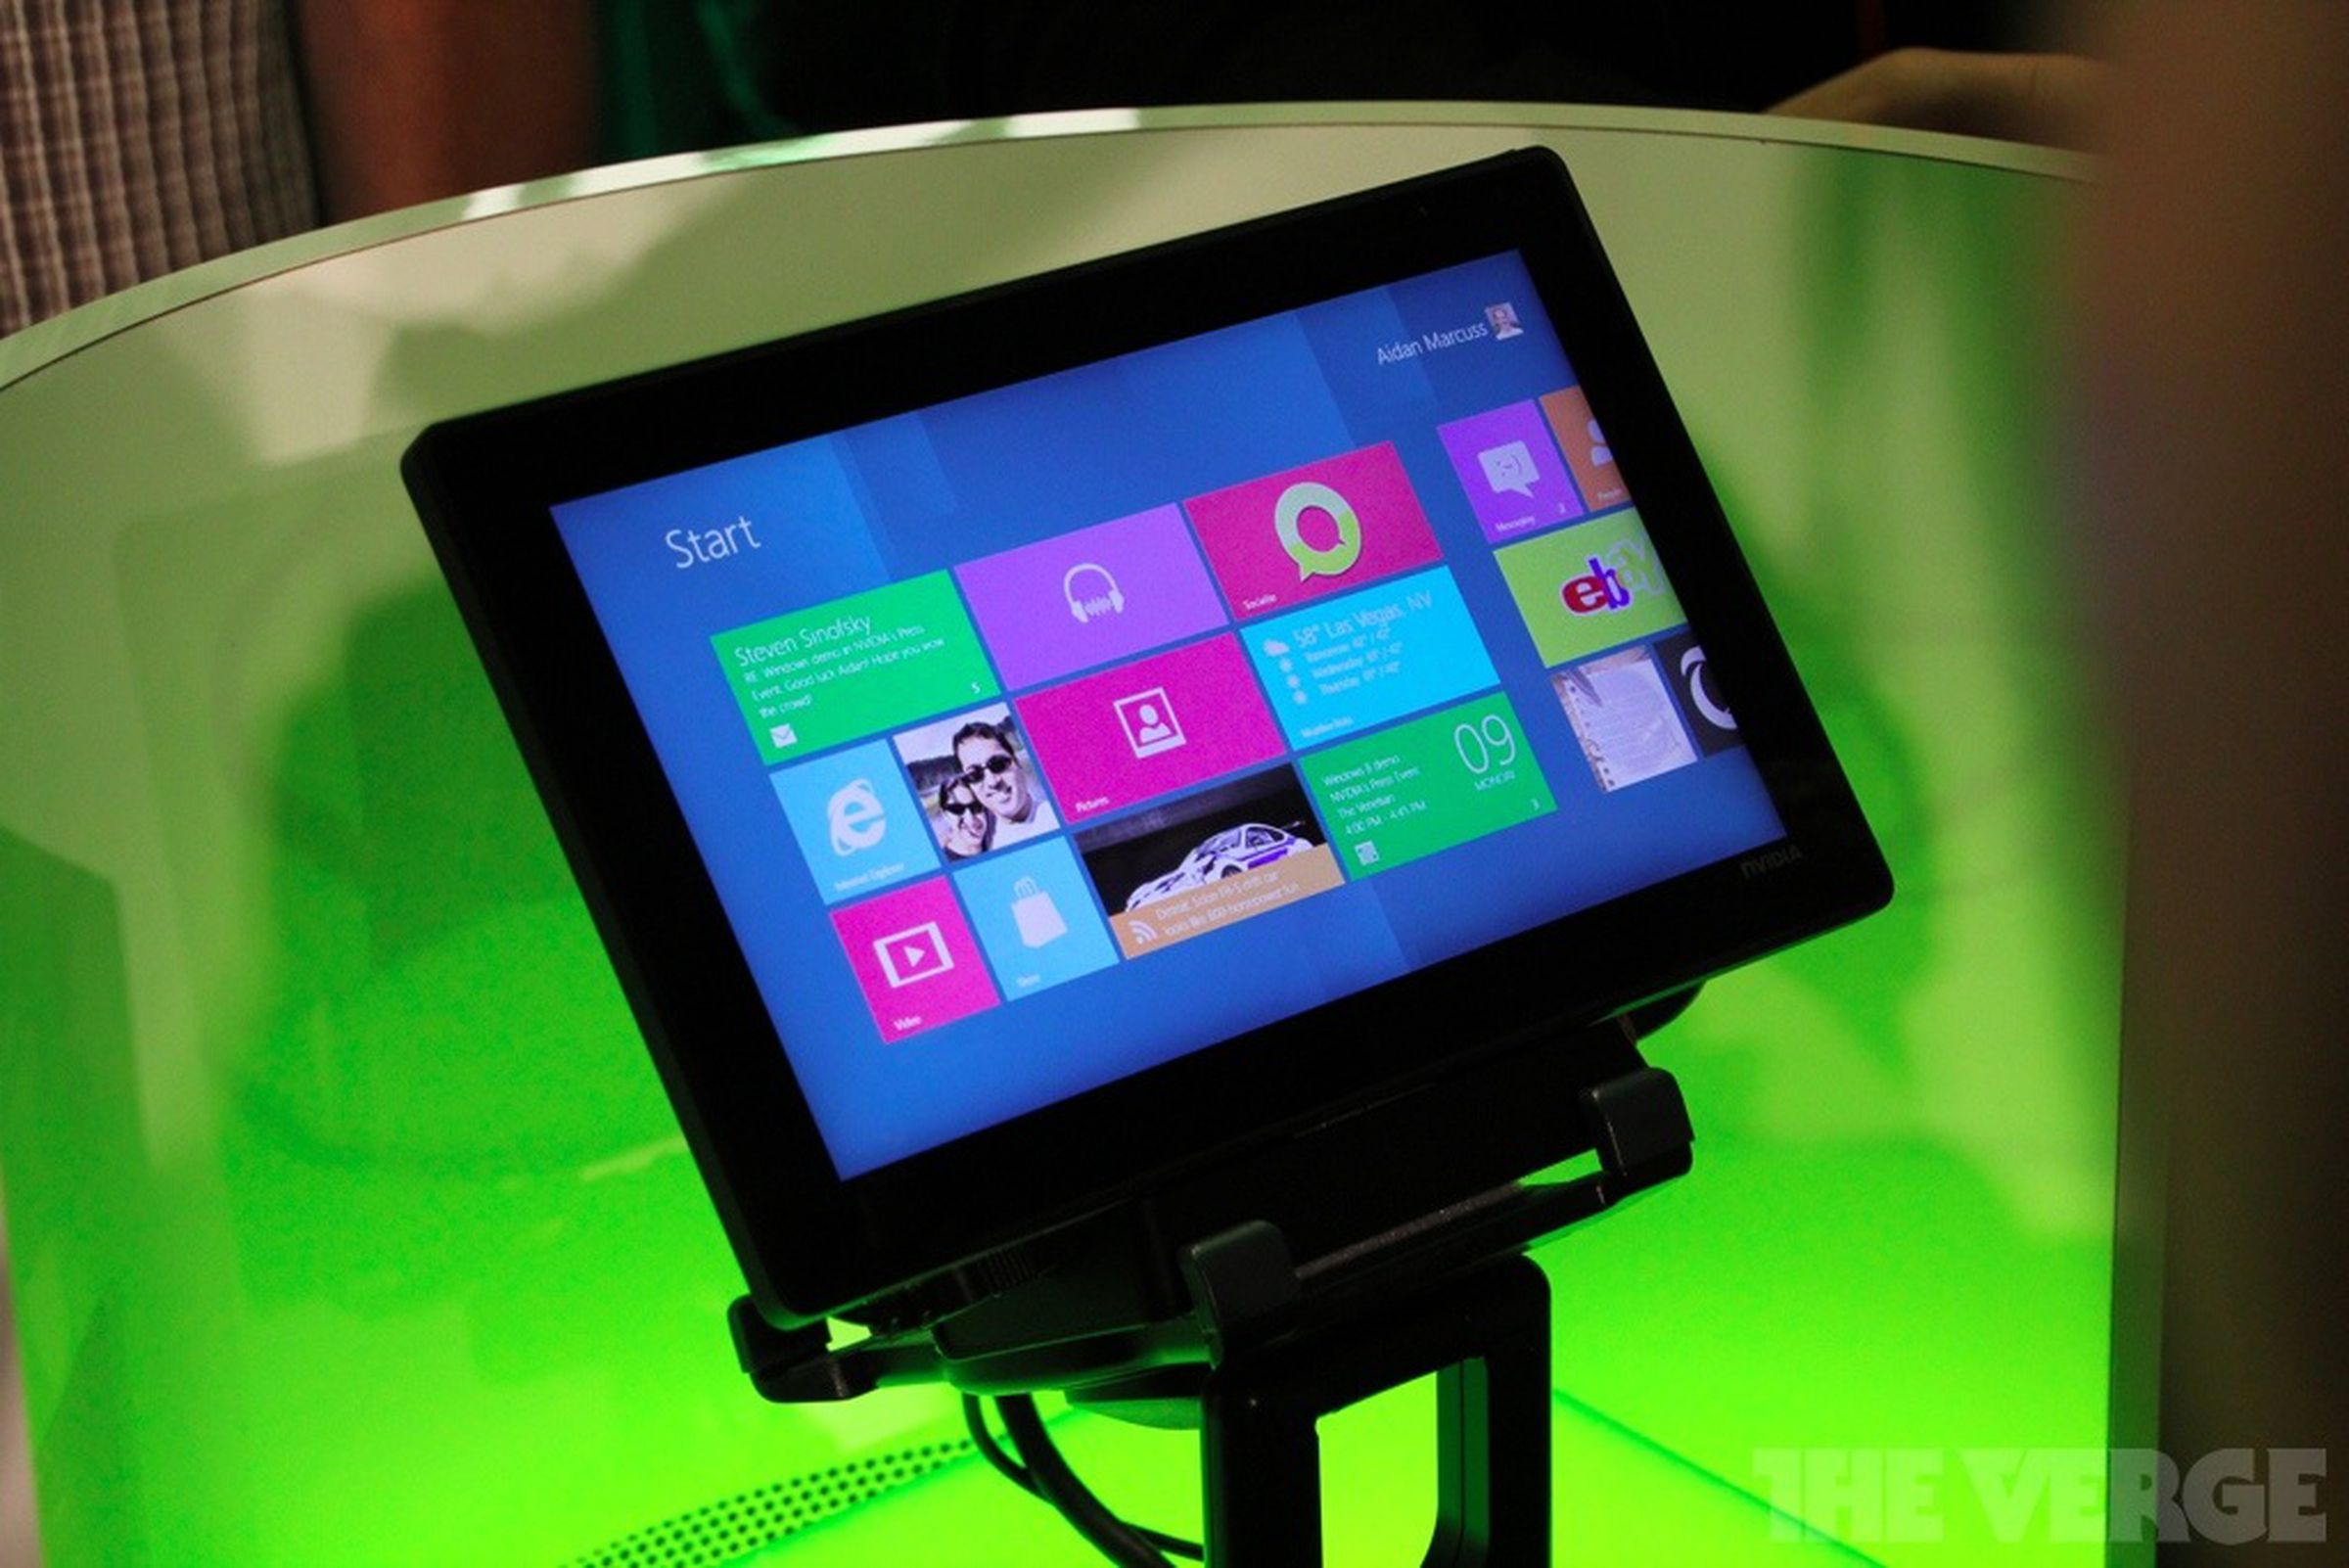 Nvidia's Tegra 3 Windows 8 reference tablet pictures